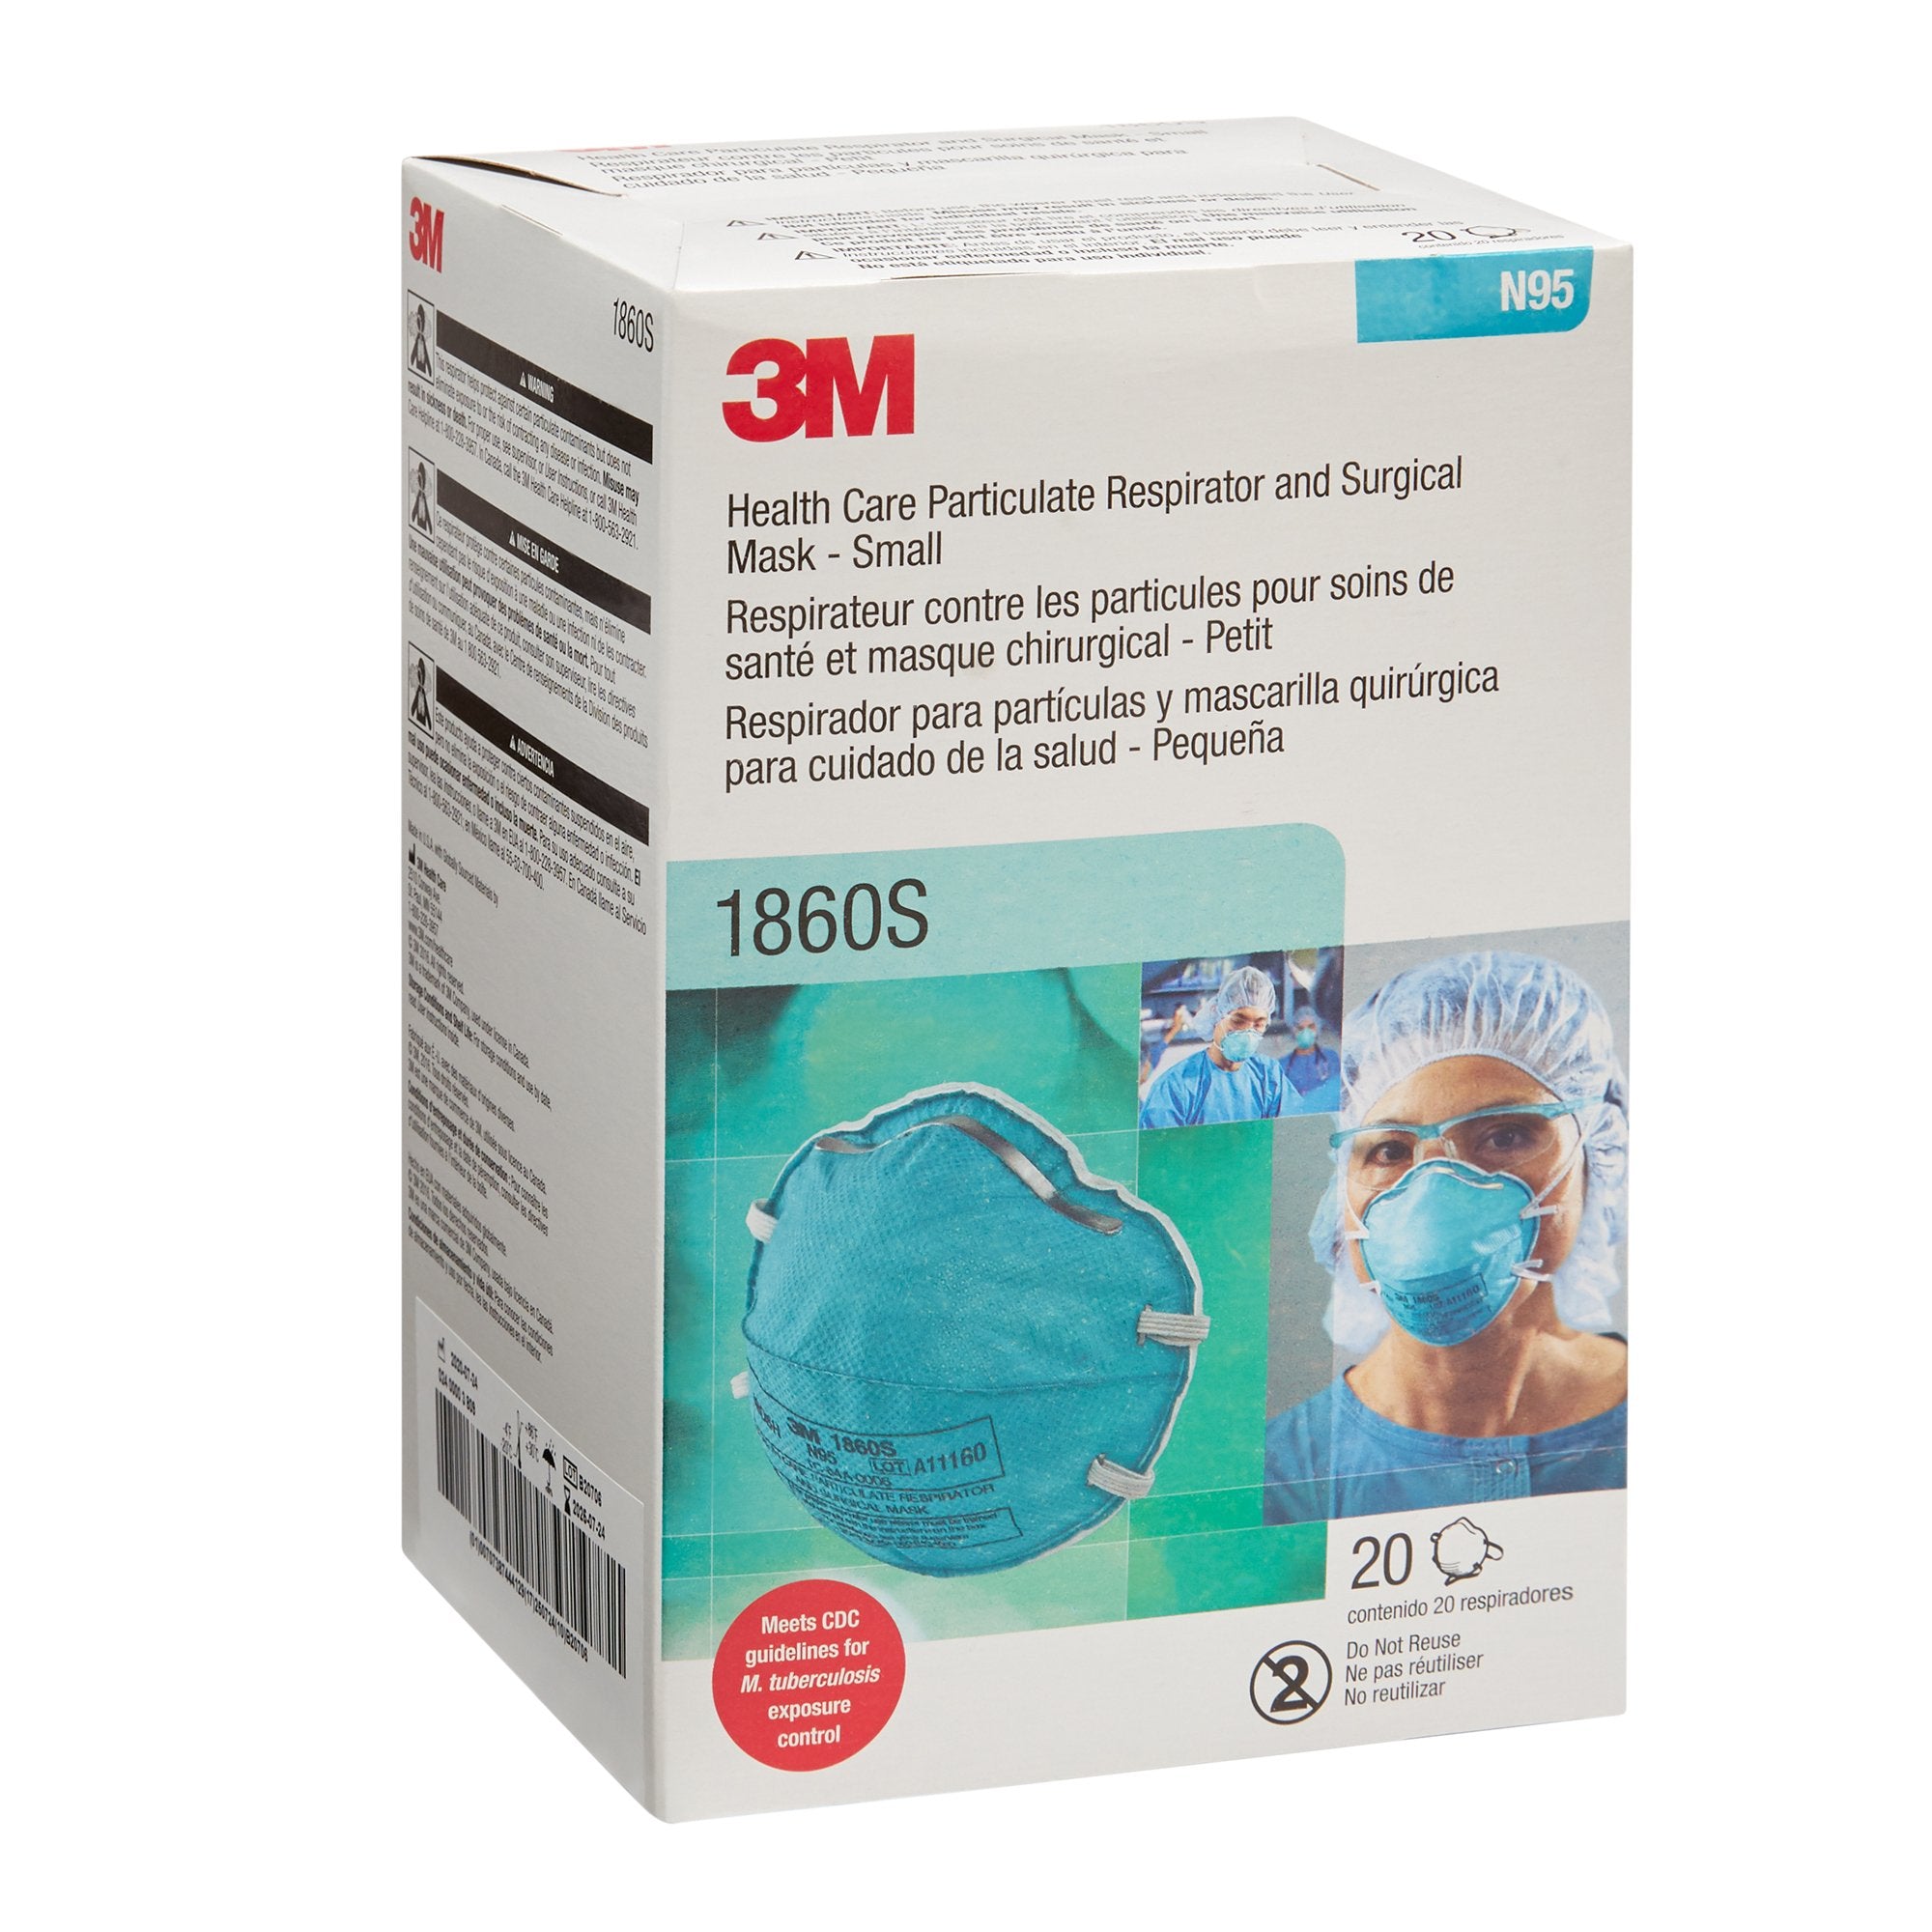 Particulate Respirator / Surgical Mask 3M Medical N95 Cup Elastic Strap Small Blue NonSterile ASTM F1862 Adult